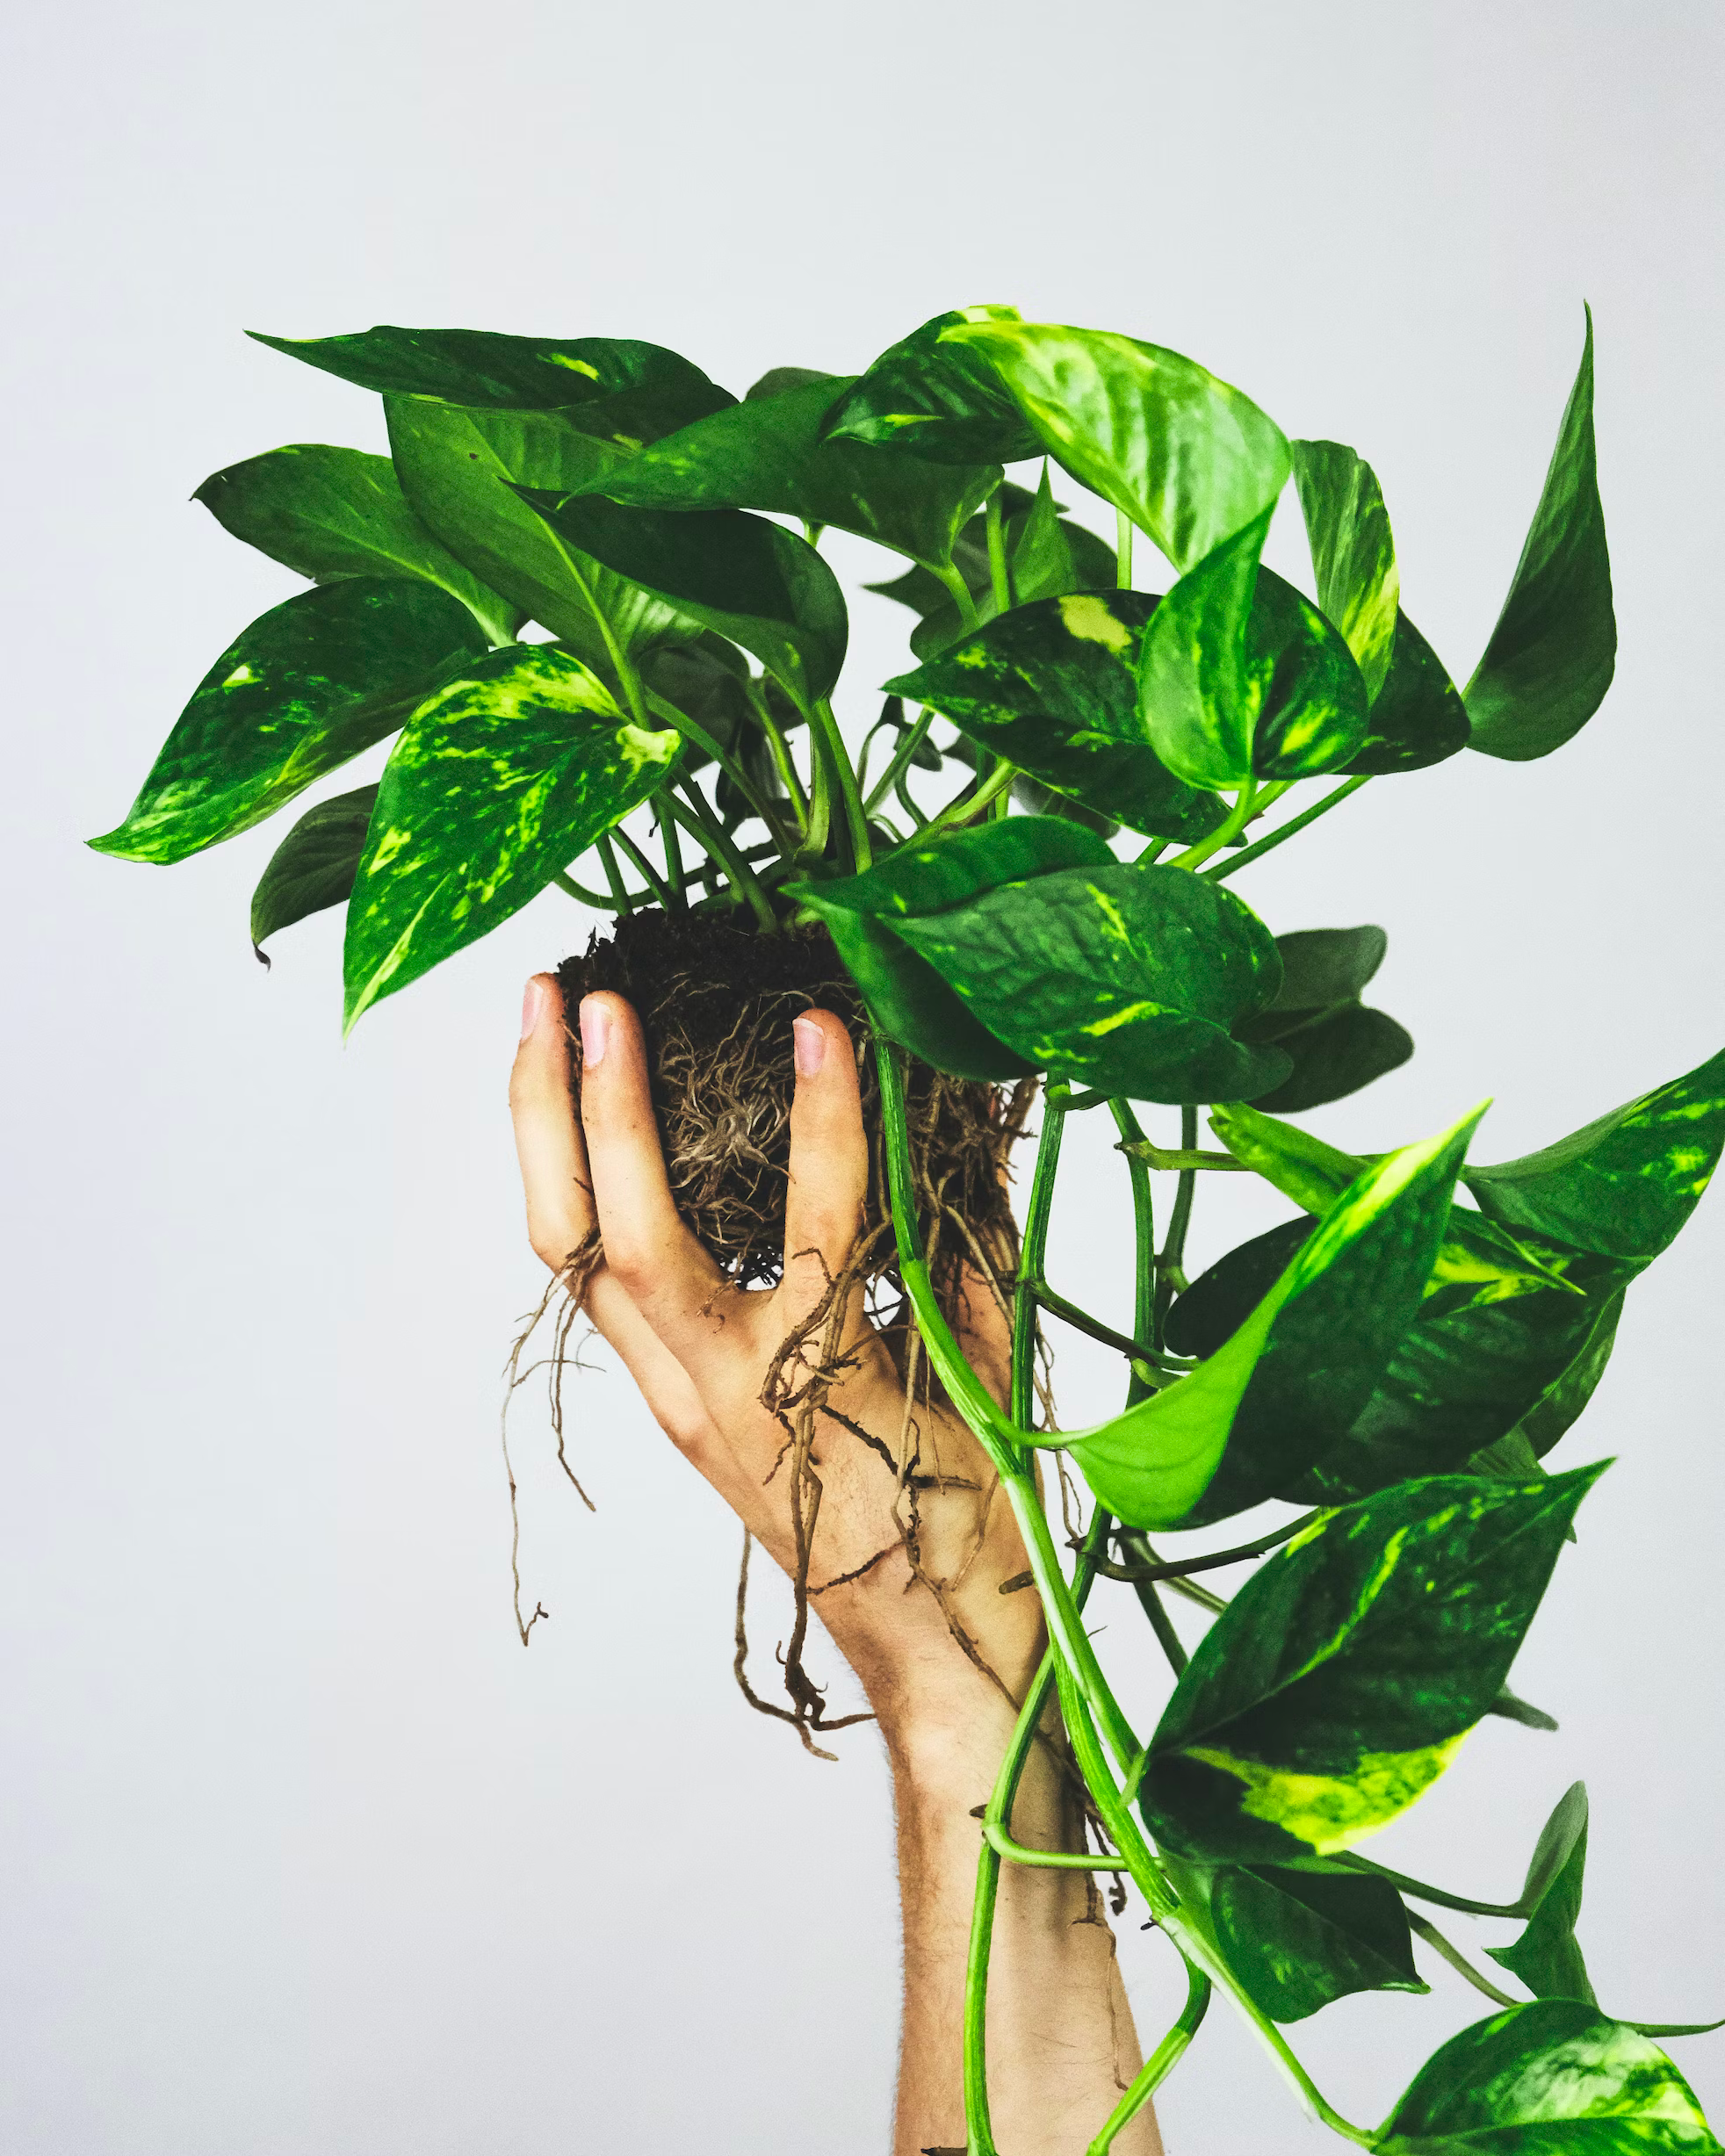 How to Propagate Golden Pothos